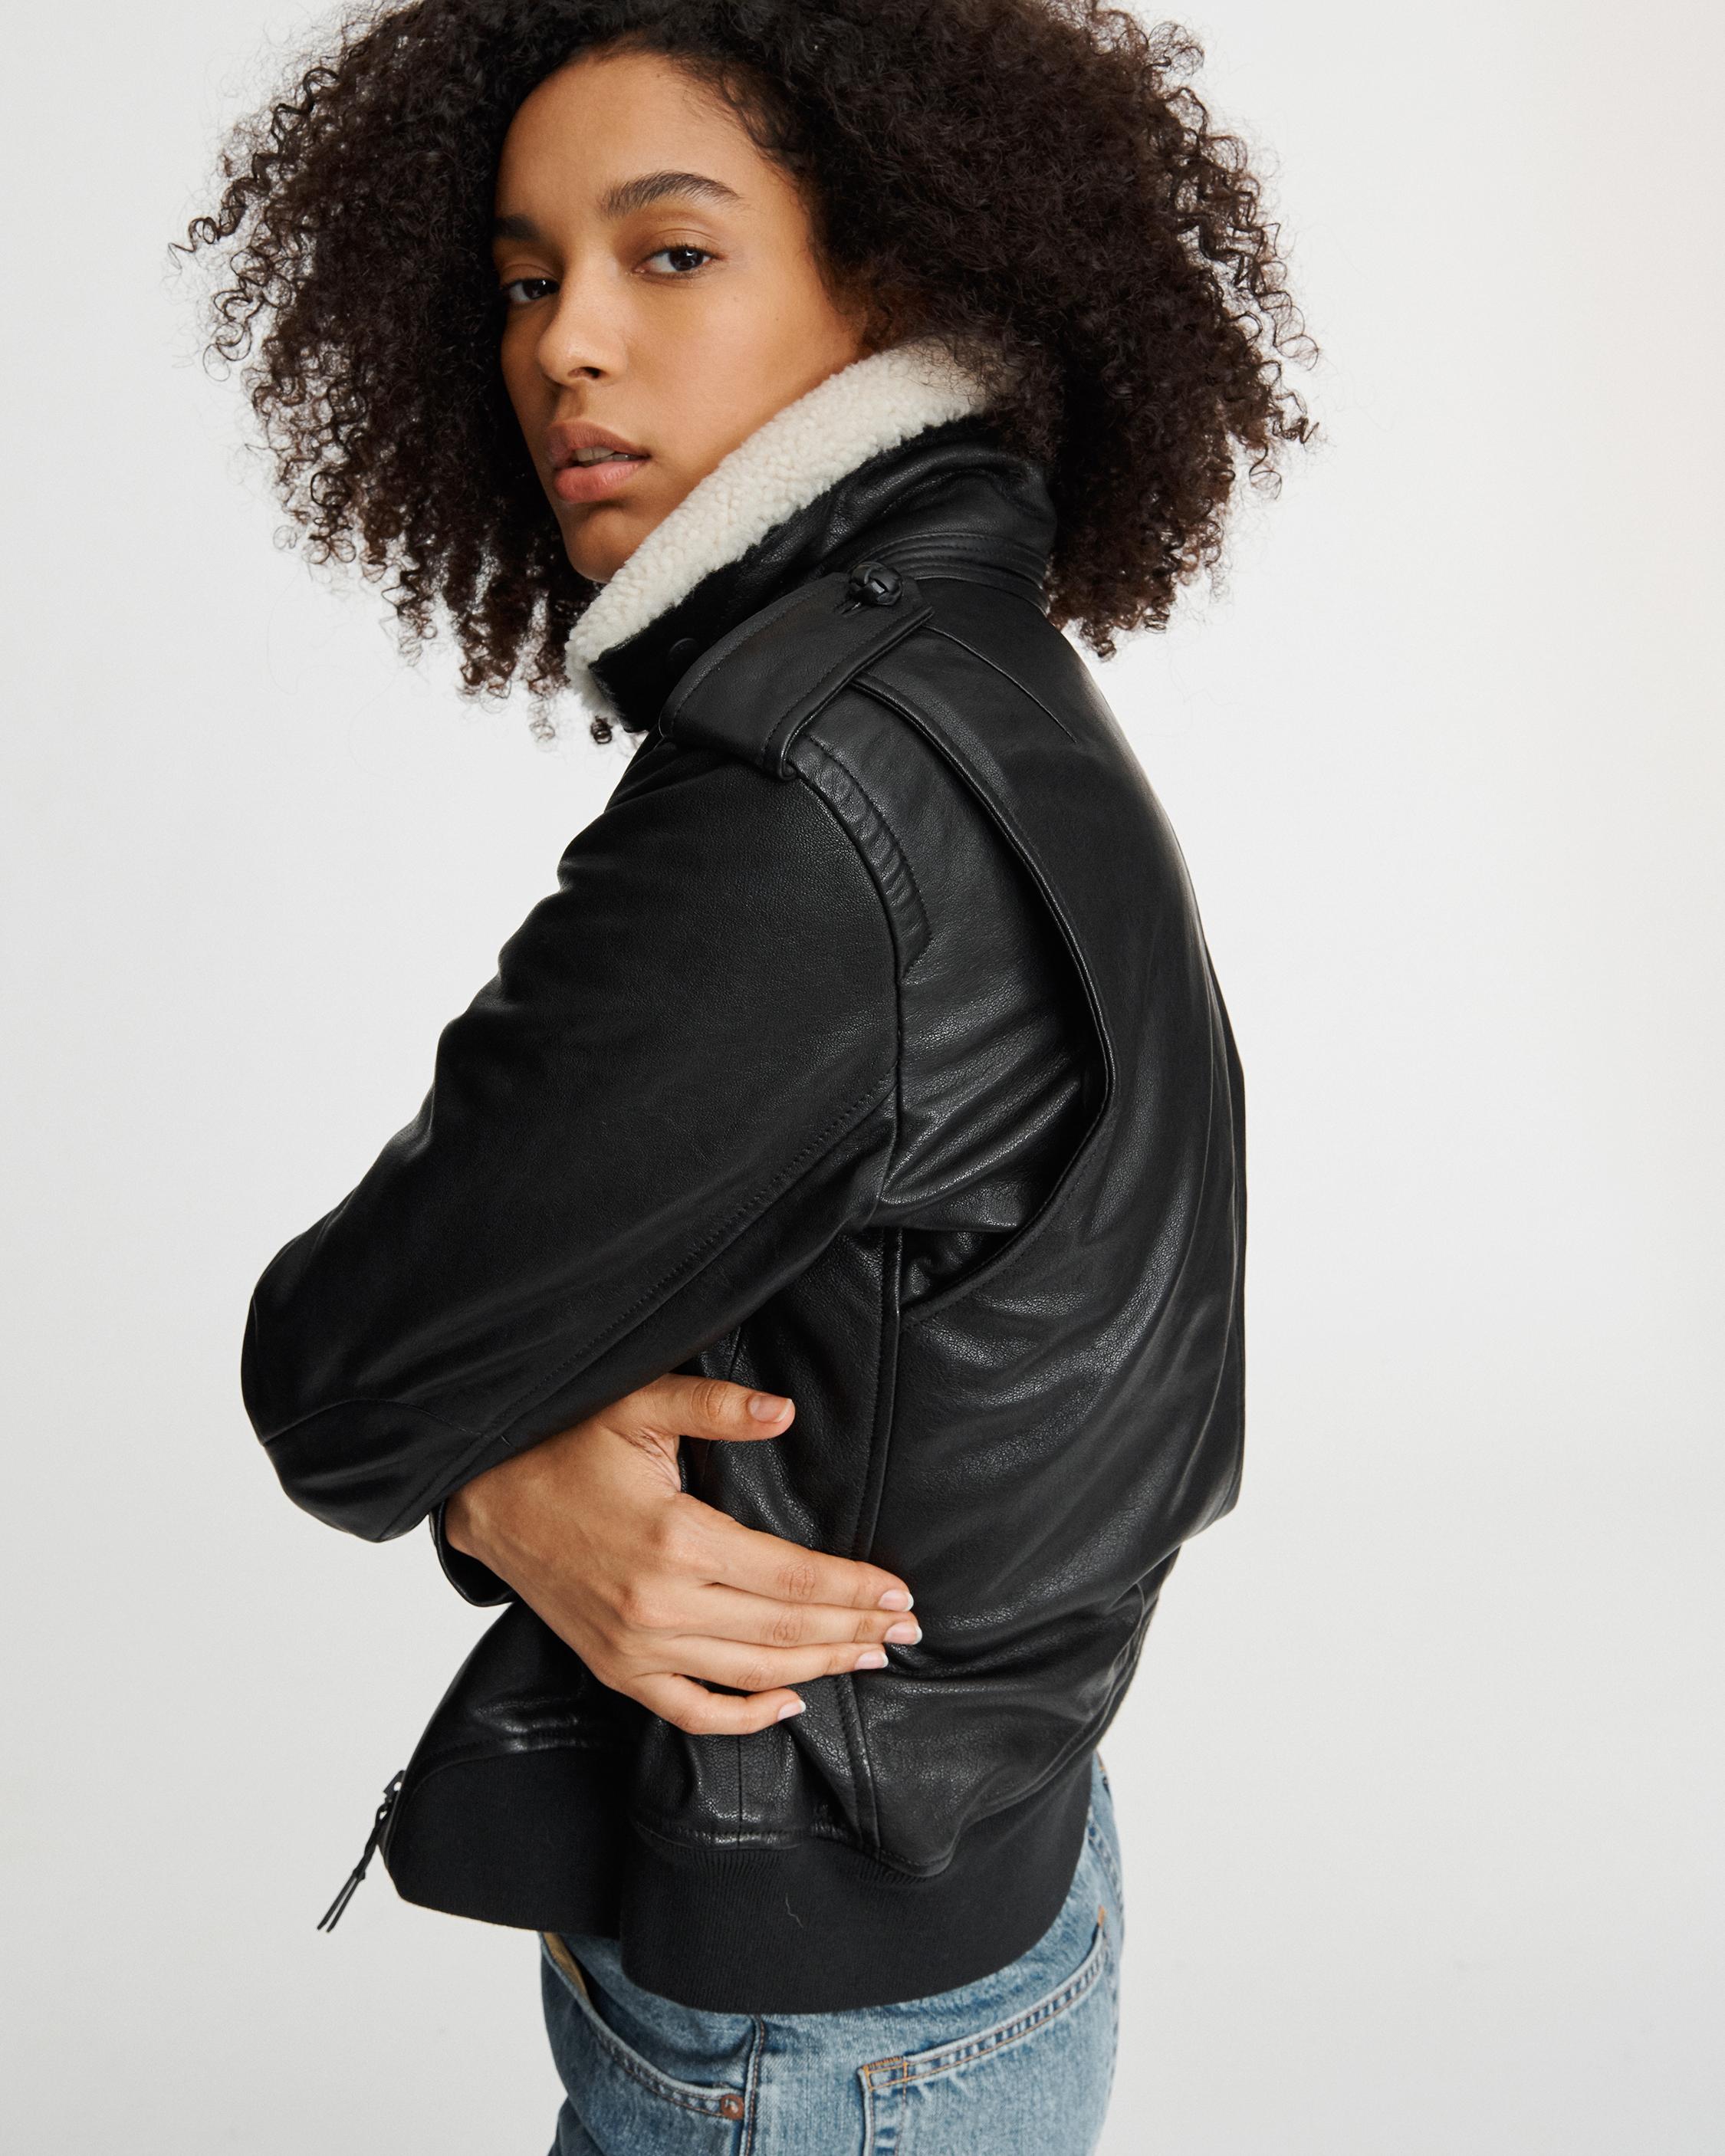 Maivy Leather Bomber Jacket with Shearling Collar | rag & bone